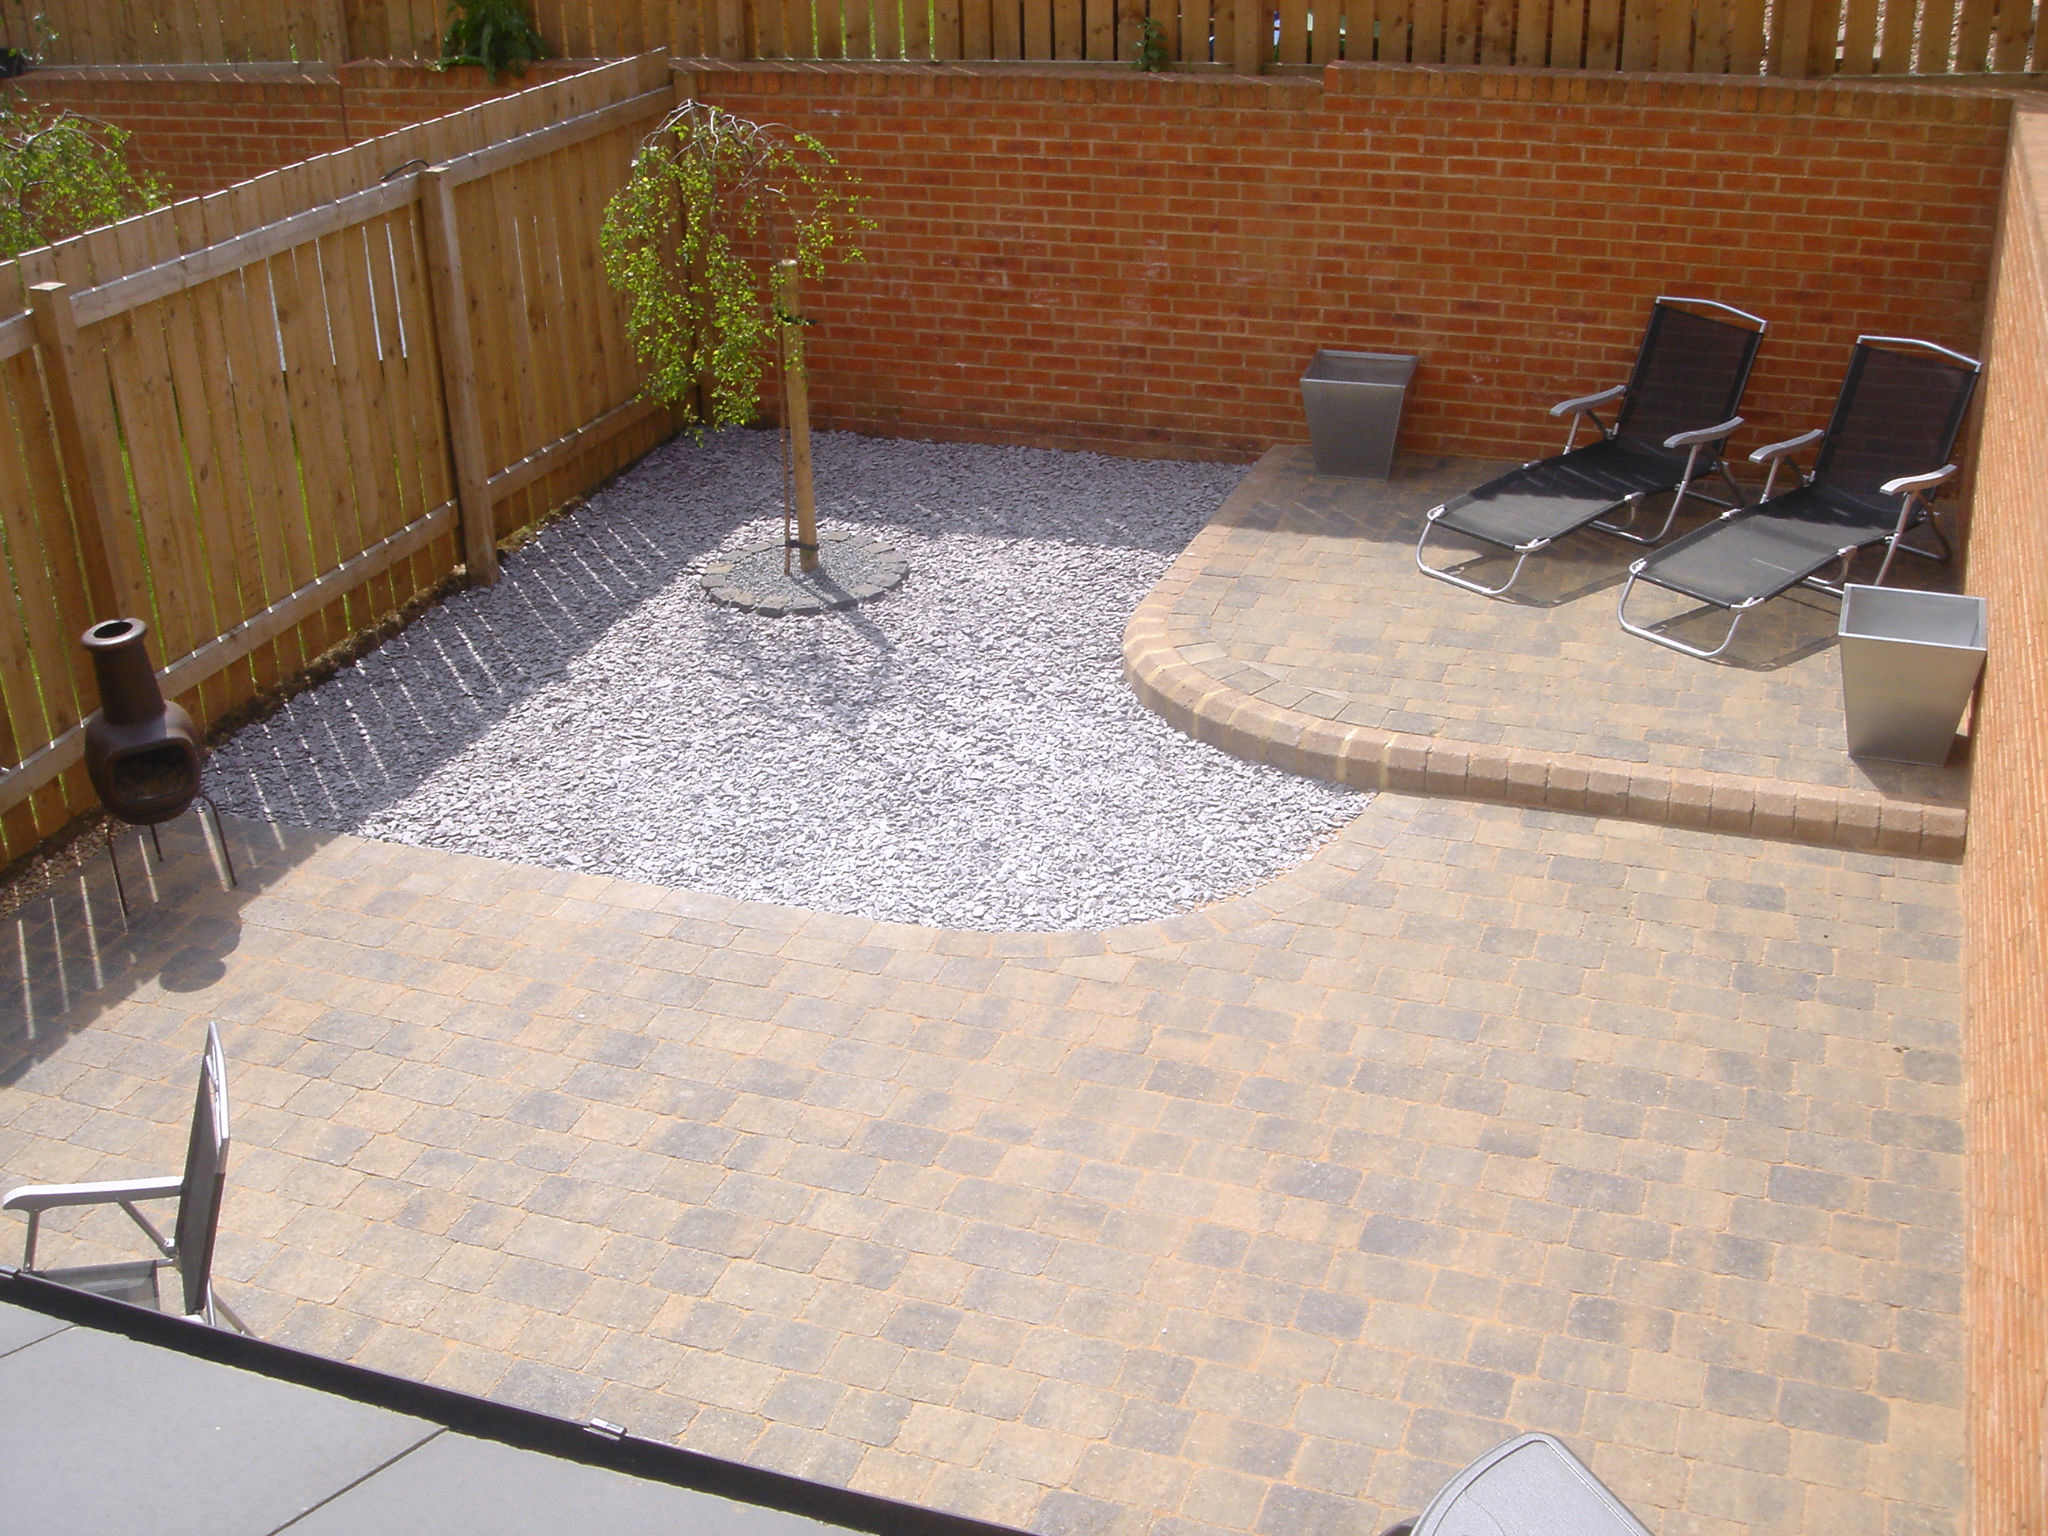 Low Maintenance Gardens Murrie Maher Block Paving And Landscaping